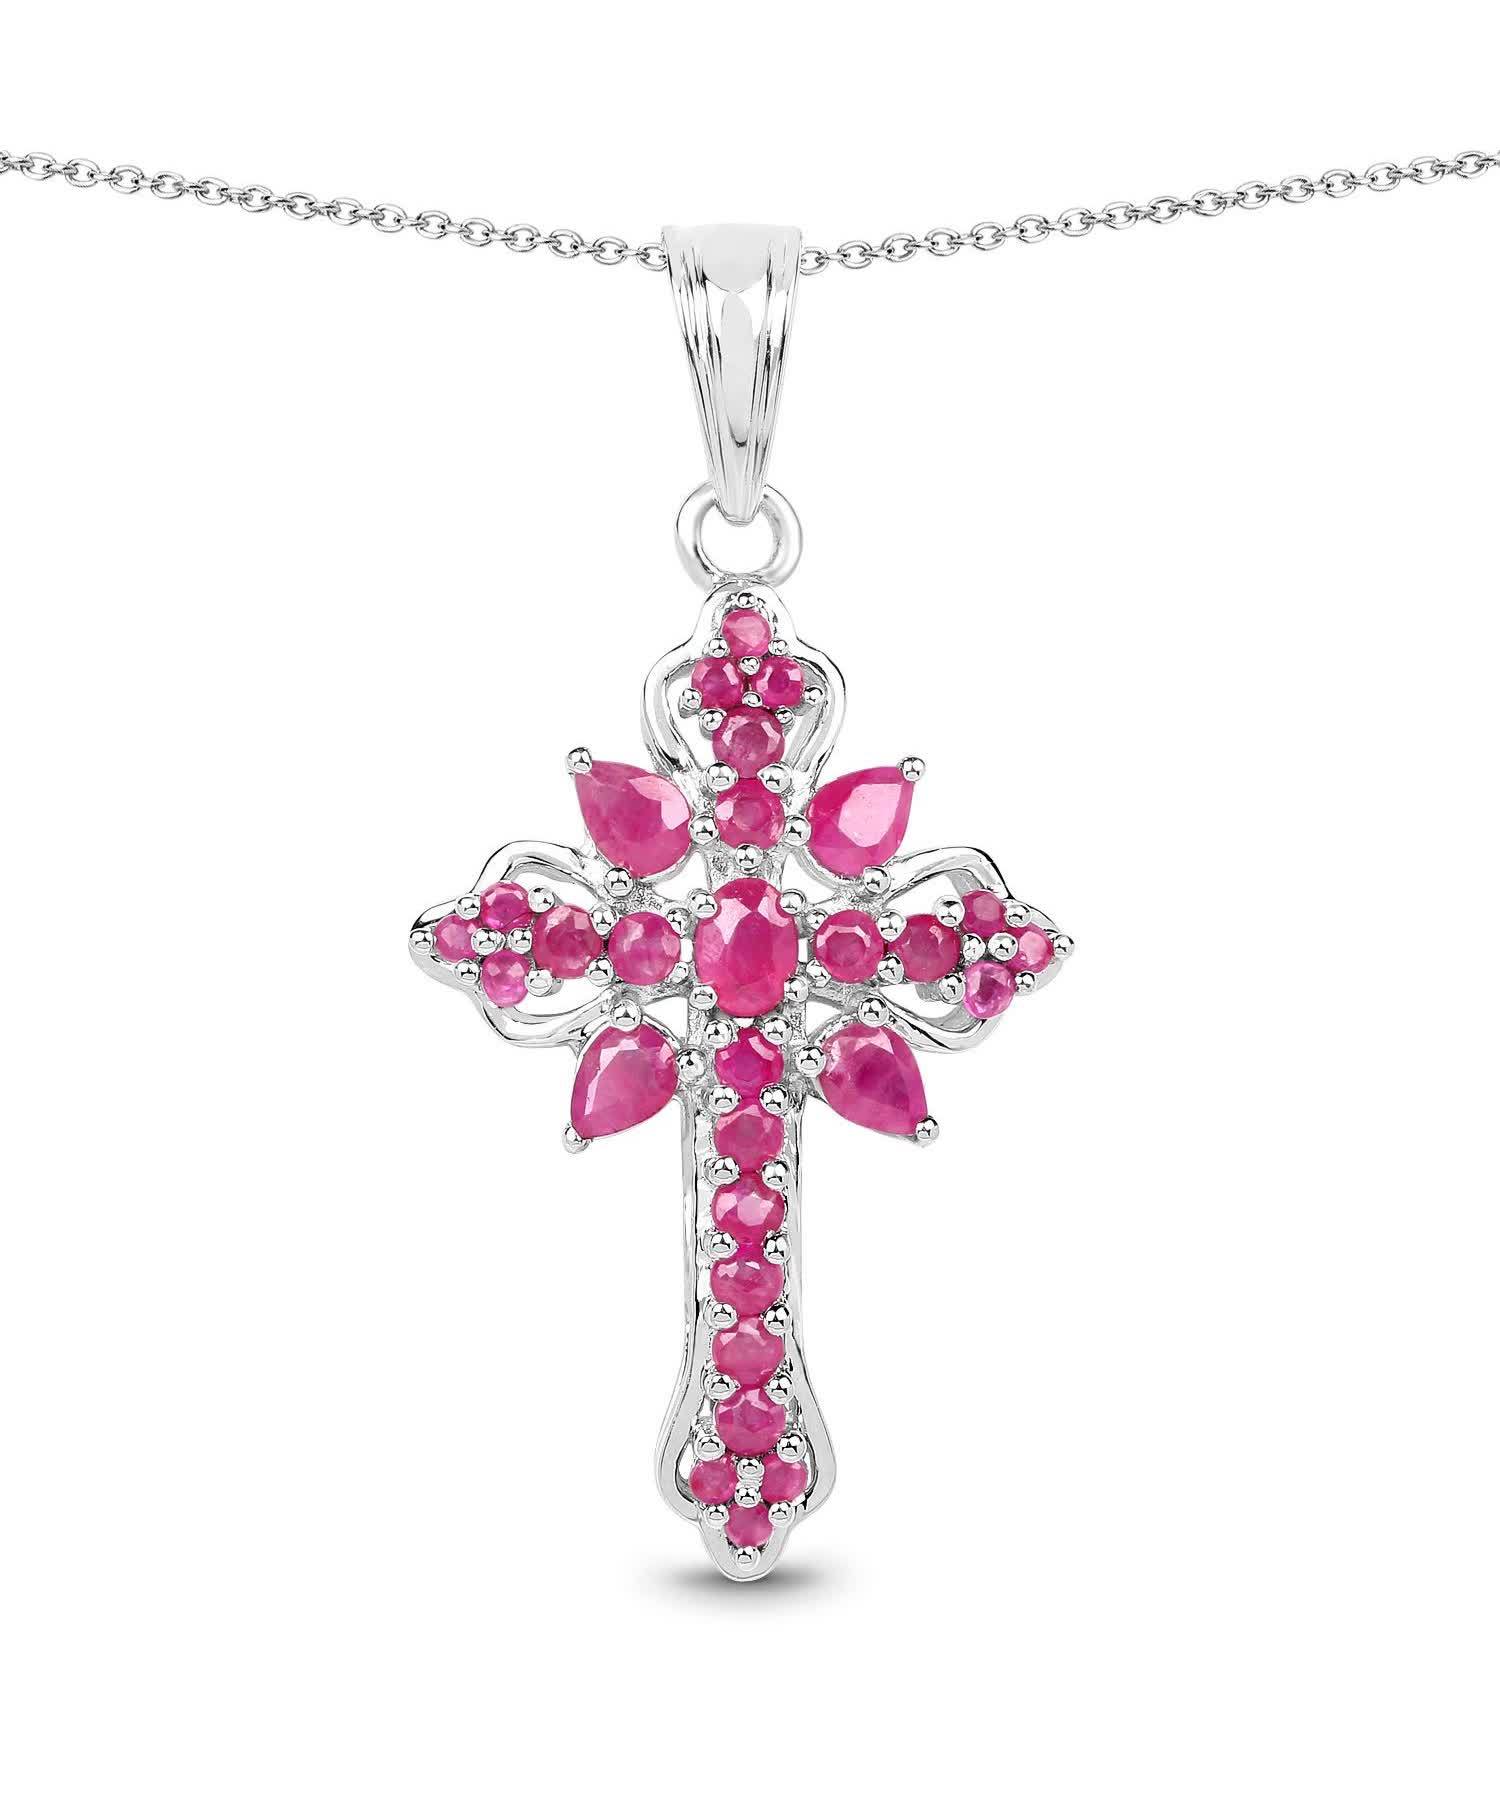 1.85ctw Natural Raspberry Ruby Rhodium Plated 925 Sterling Silver Cross Pendant With Chain View 1